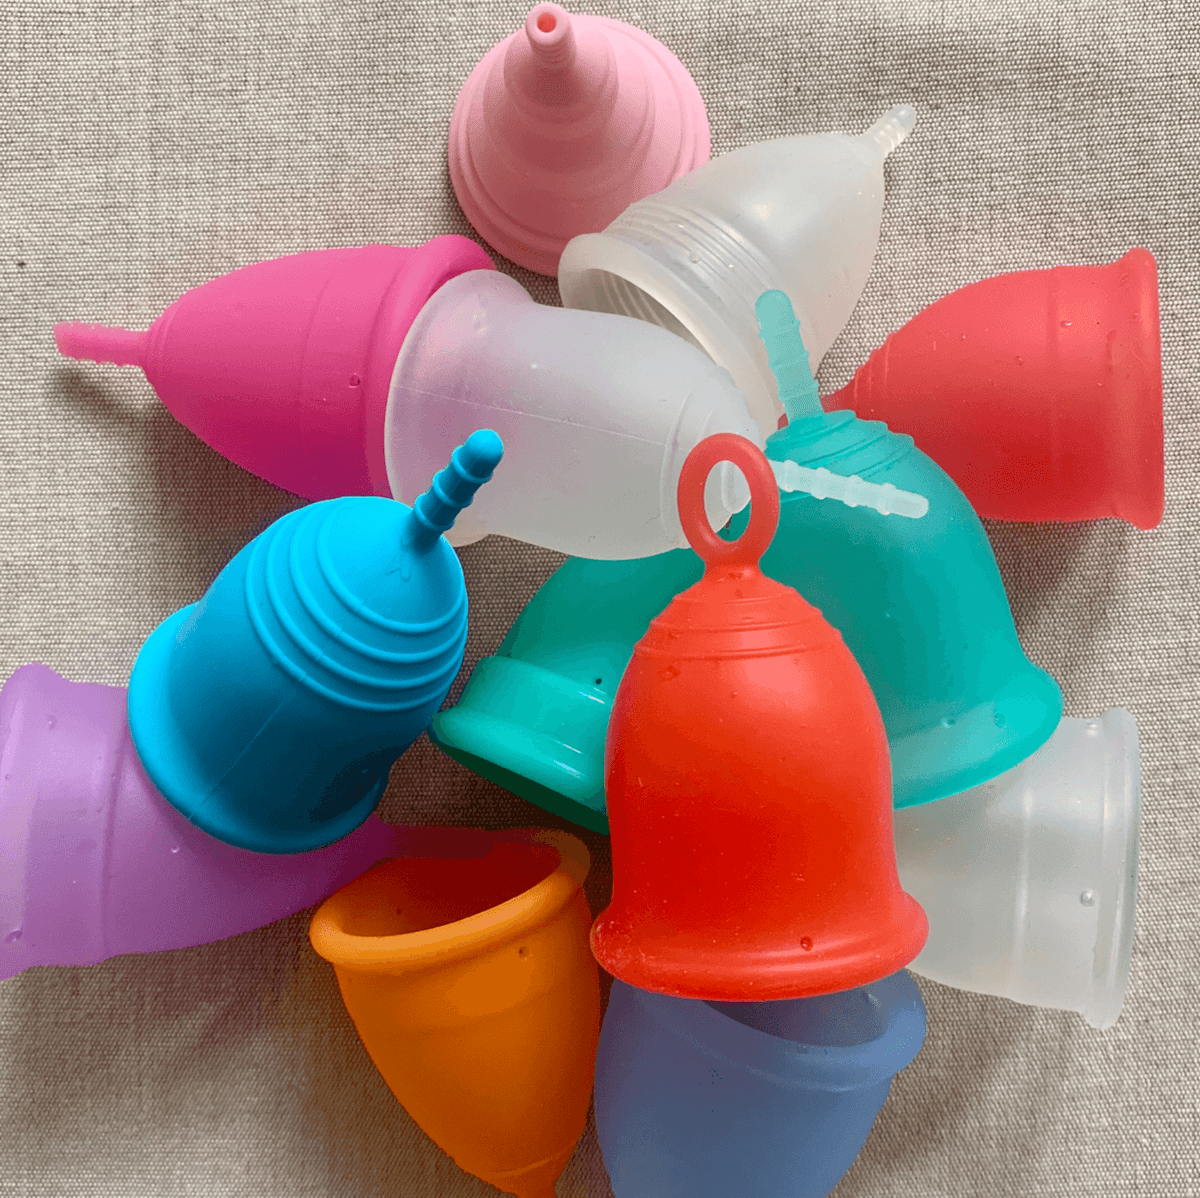 Where should the stem of my menstrual cup be?